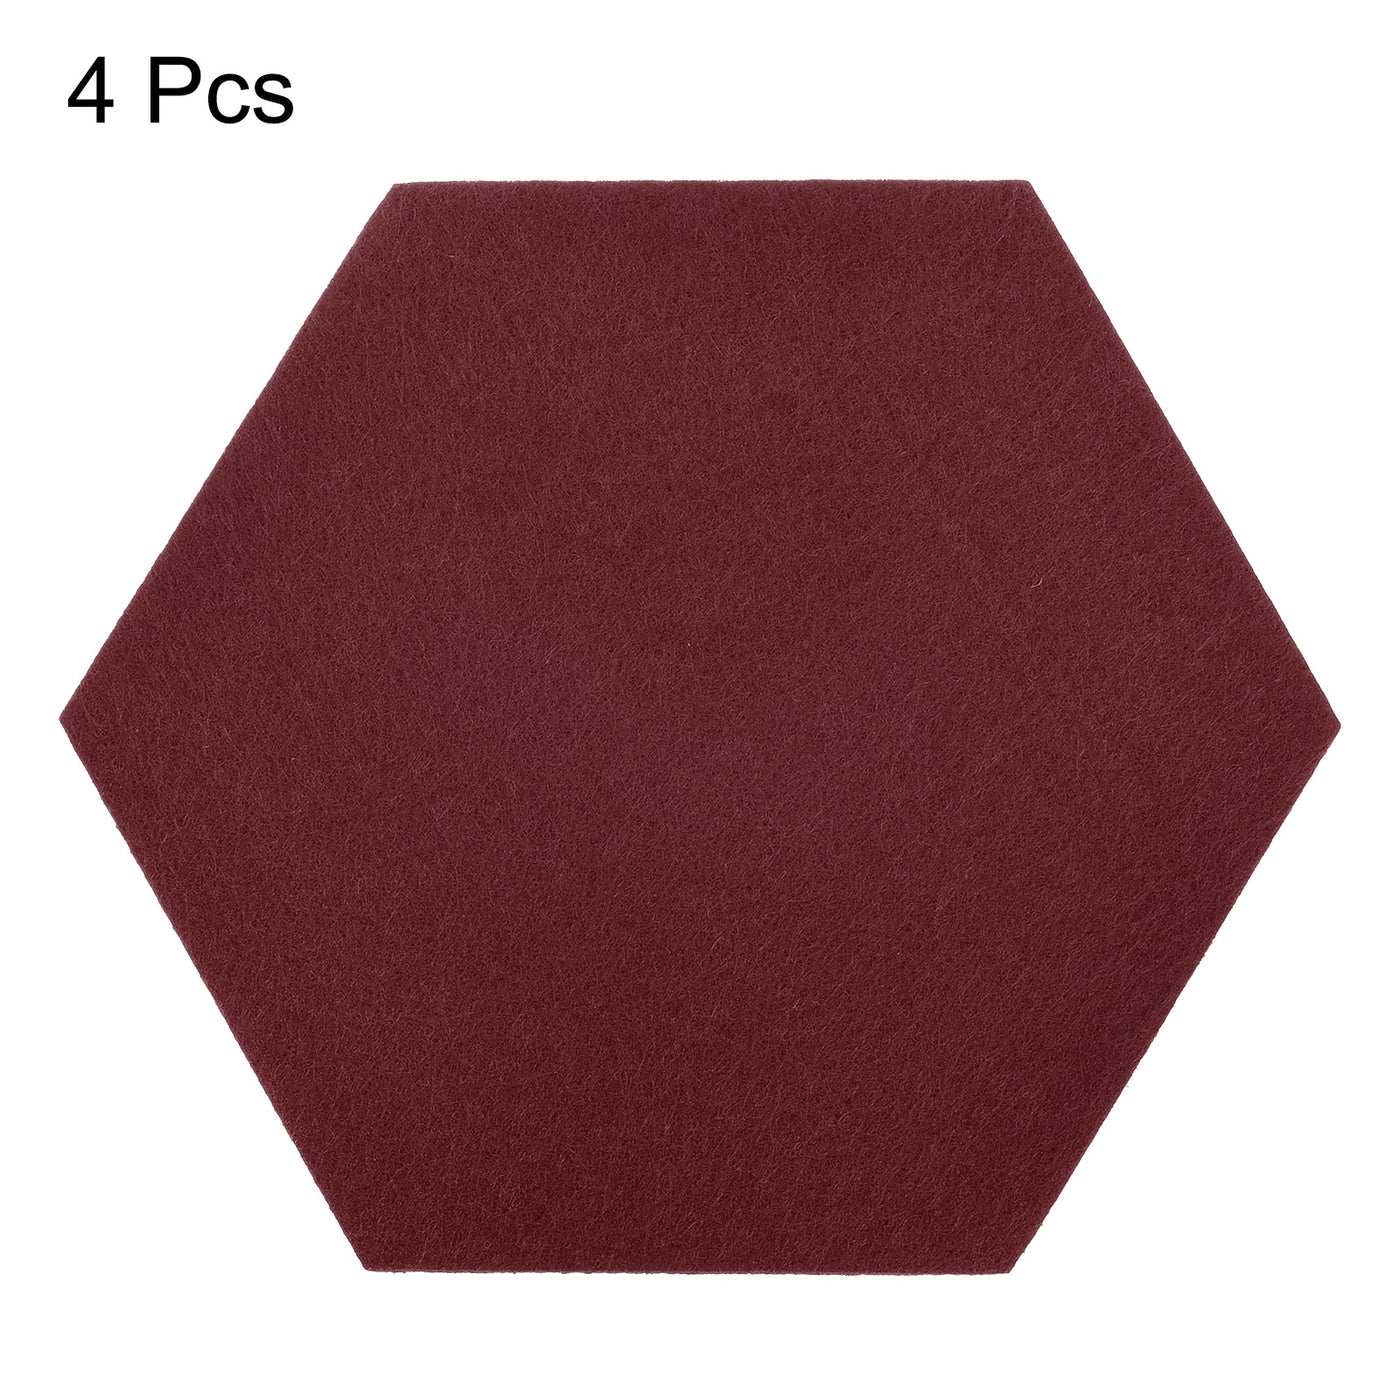 uxcell Uxcell Felt Coasters 4pcs Absorbent Pad Coaster for Drink Cup Pot Bowl Vase Wine Red